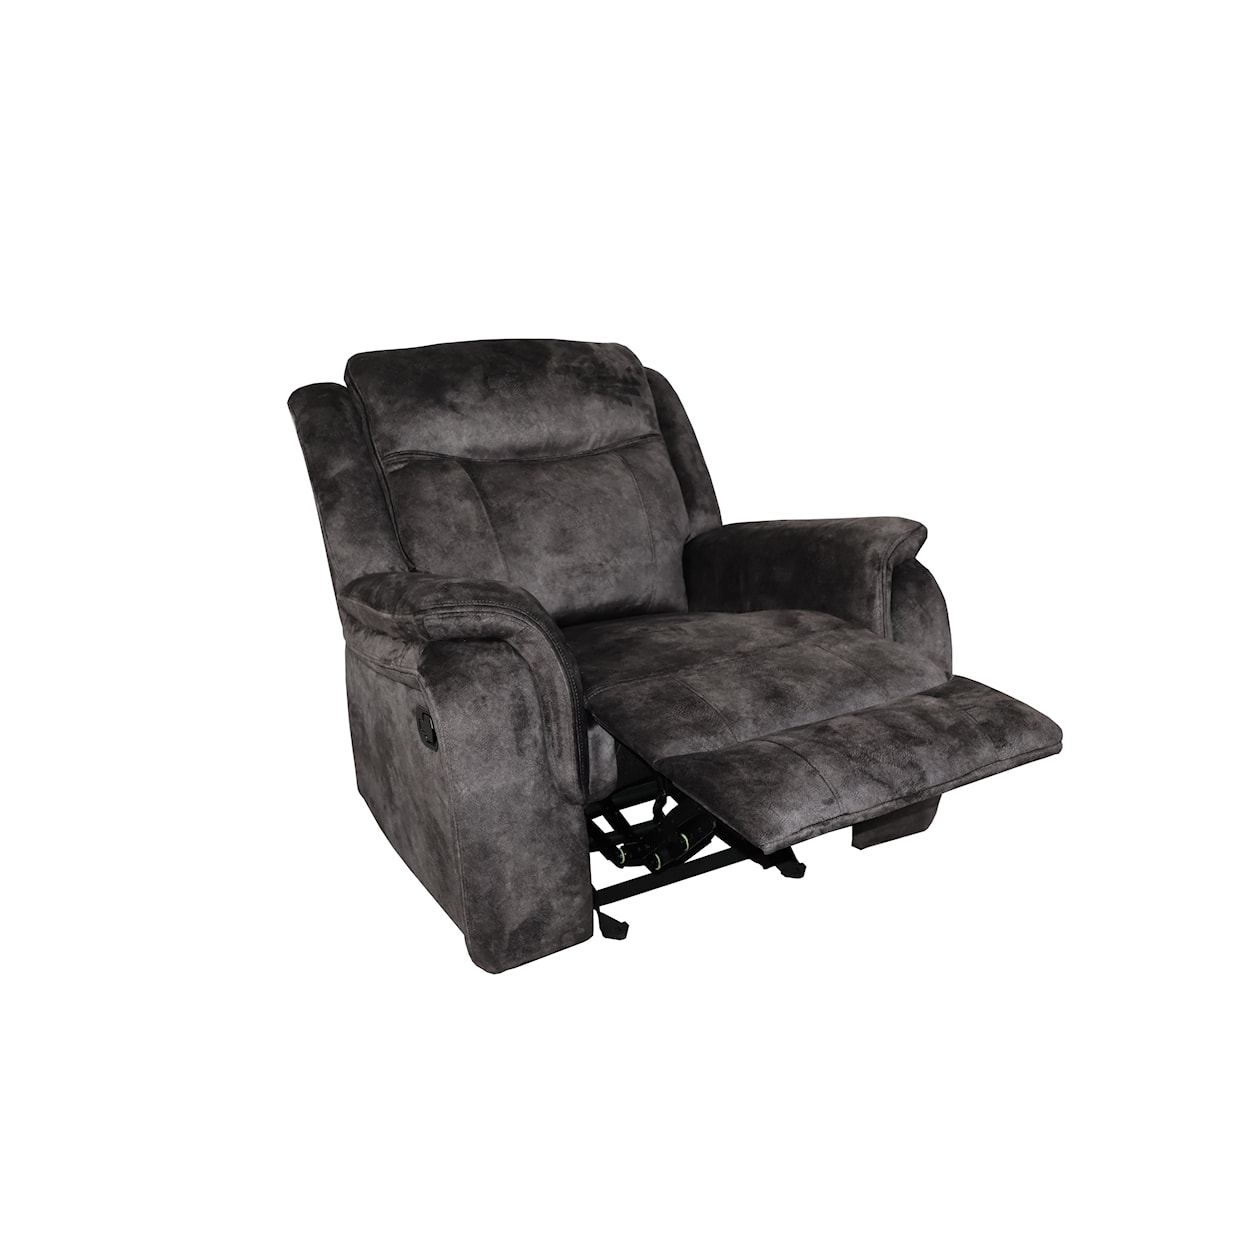 New Classic Park City Upholstered Glider Recliner